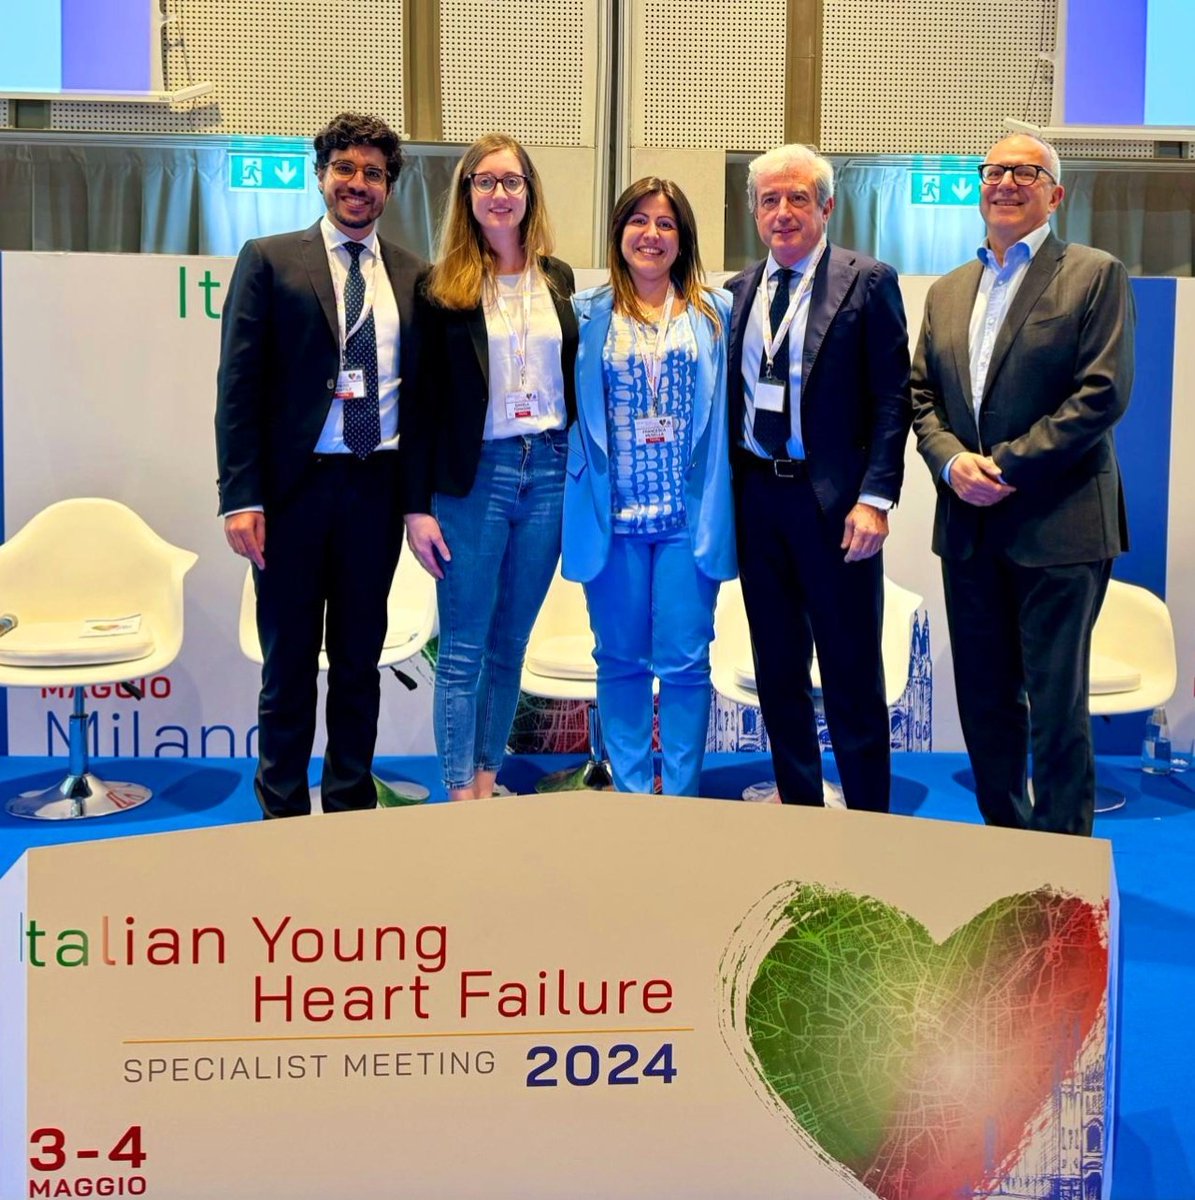 Happy for the success of our first Italian 🇮🇹 #HFAyoung event in Milan with our @HFA_President, @MarcoMetra, Piero Gentile, Francesca Musella, @_antocannata & several more. Catch you all in Lisbon! #HeartFailure2024 #HFA_ESC #HeartFailureAwarenessDays #cardiotwitter